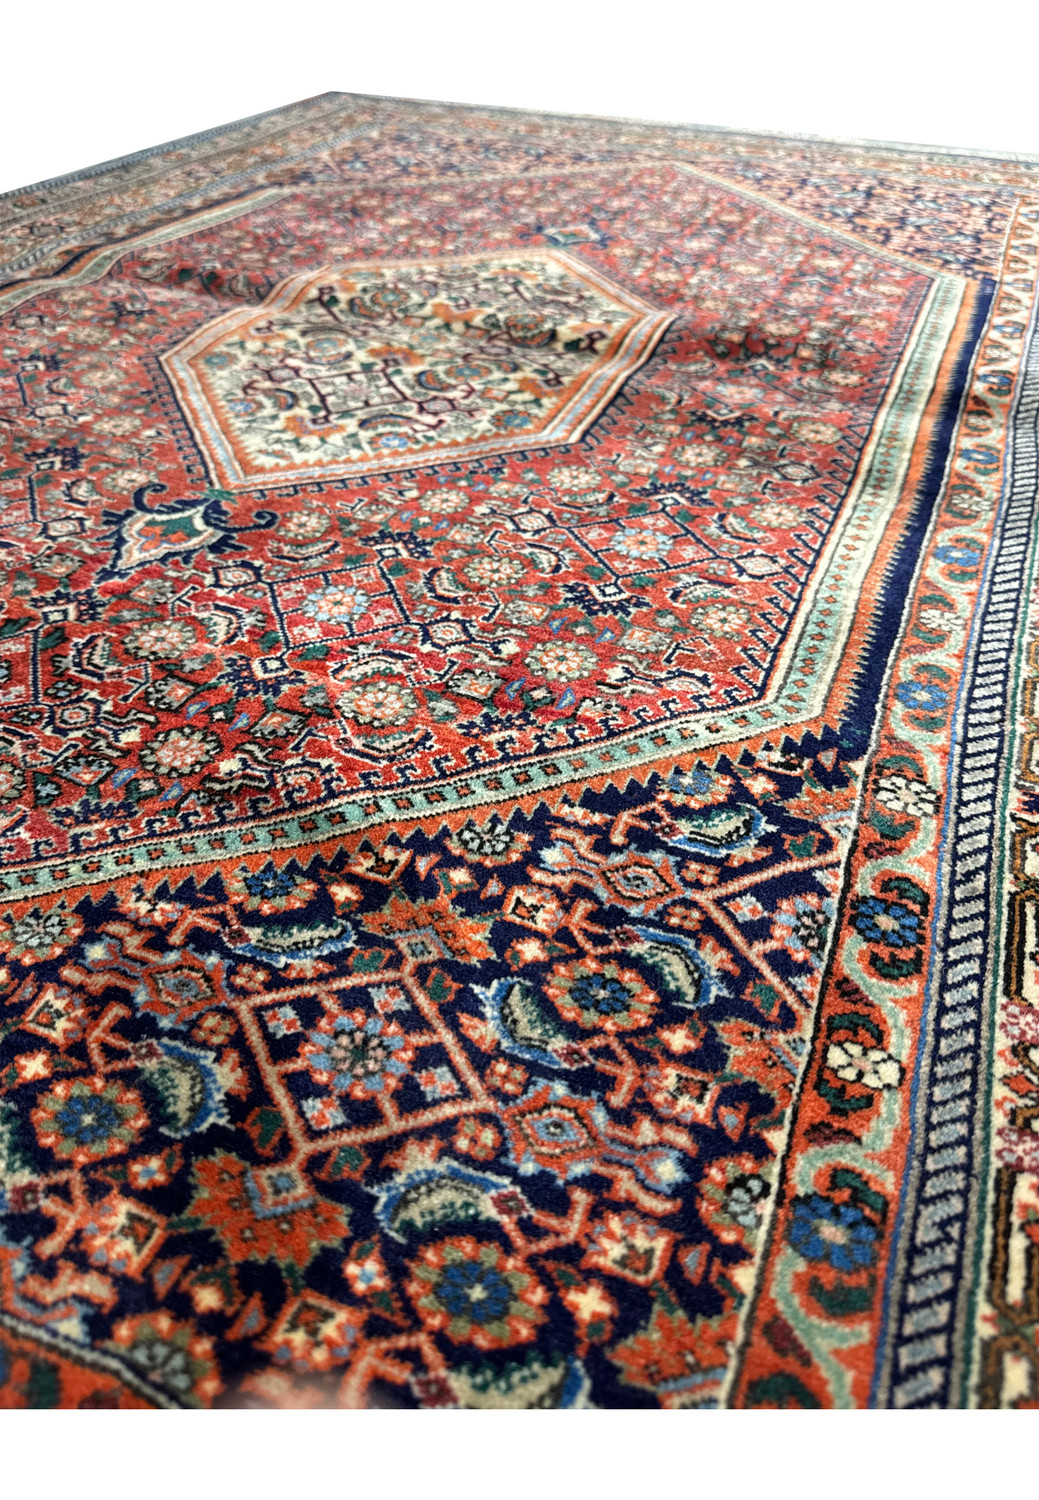 Close-up view of the central part of a Persian Bijar rug, highlighting the elaborate floral motifs and the contrasting colors within the medallion